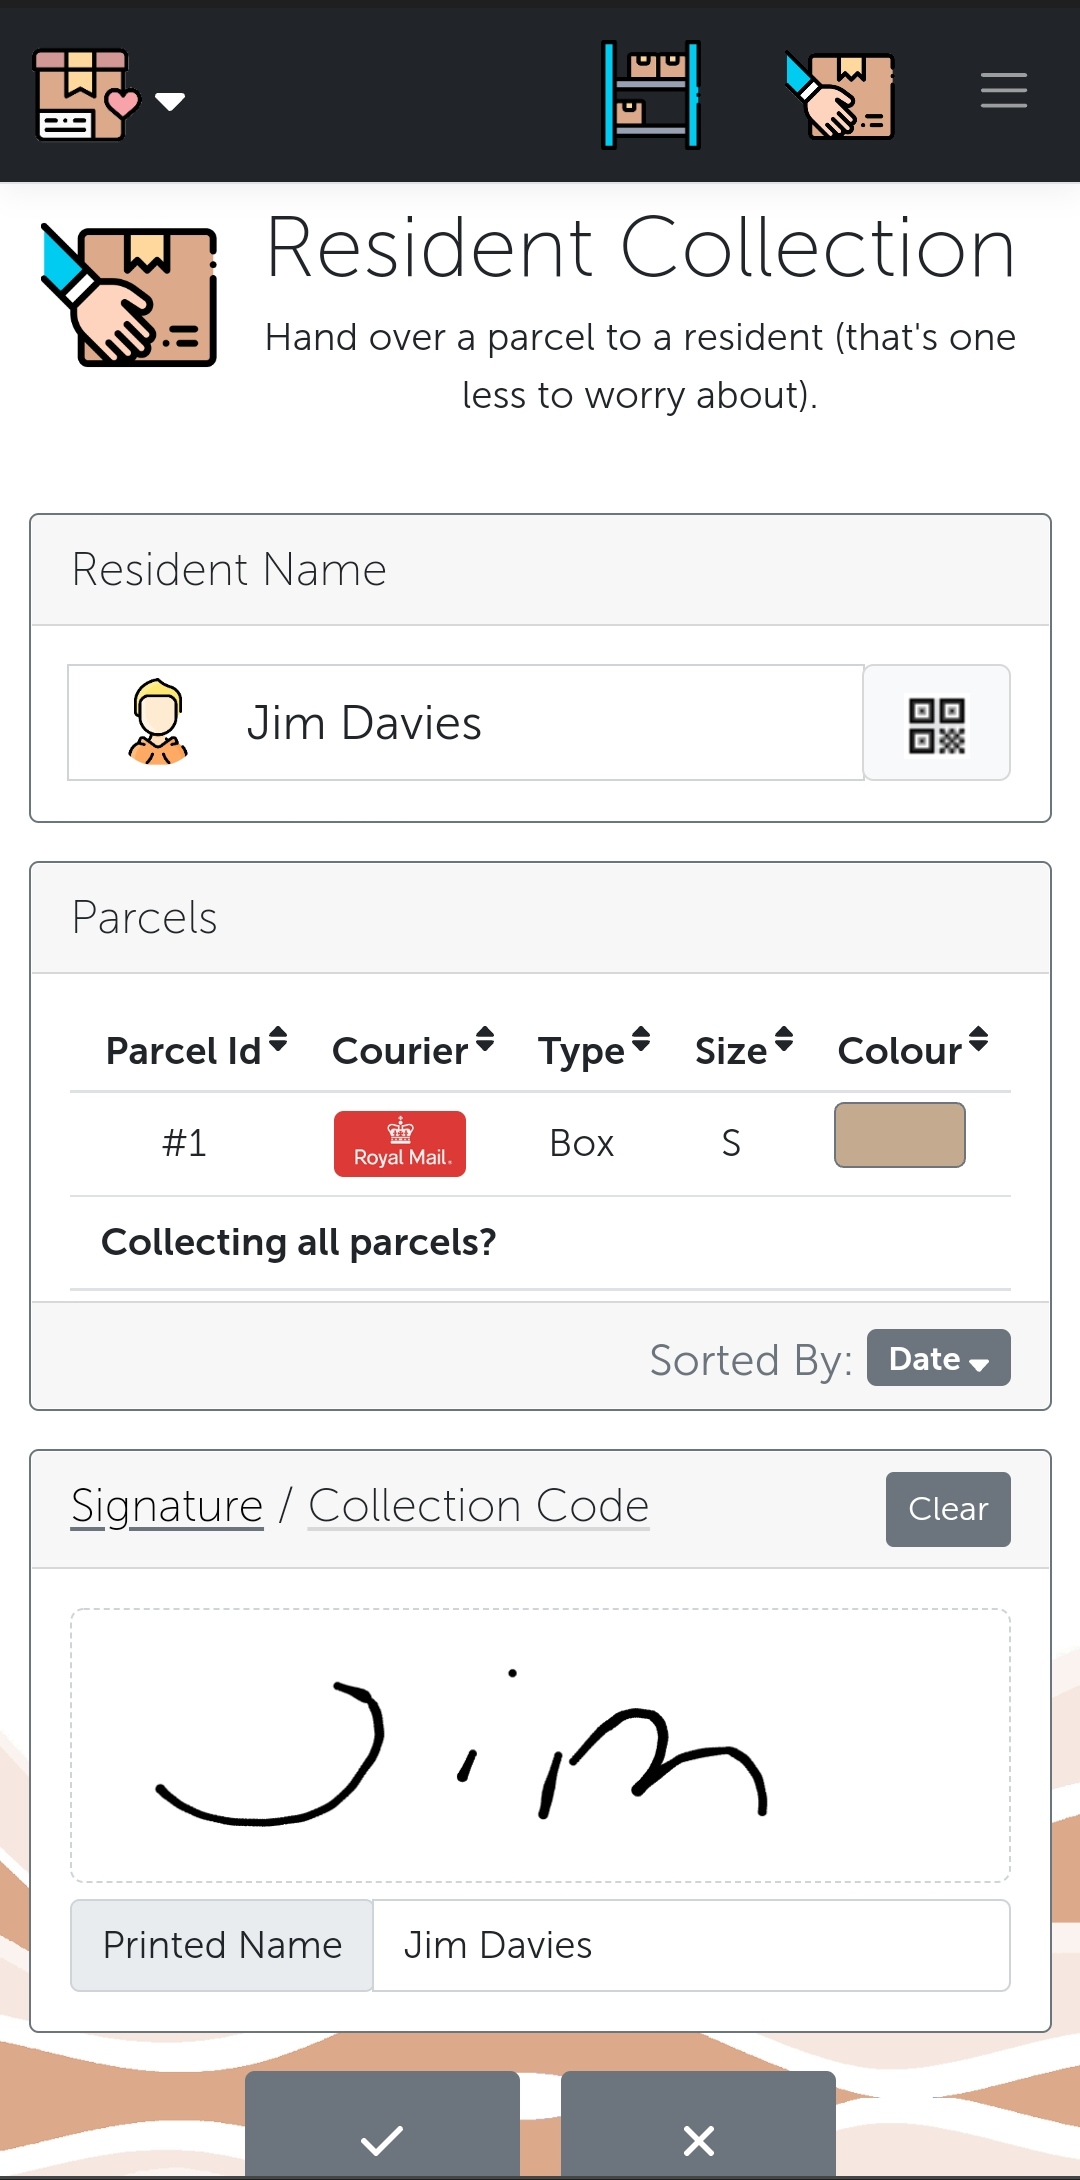 On collection, the recipient can either sign for their parcel digitally or provide their collection code to confirm pick up.